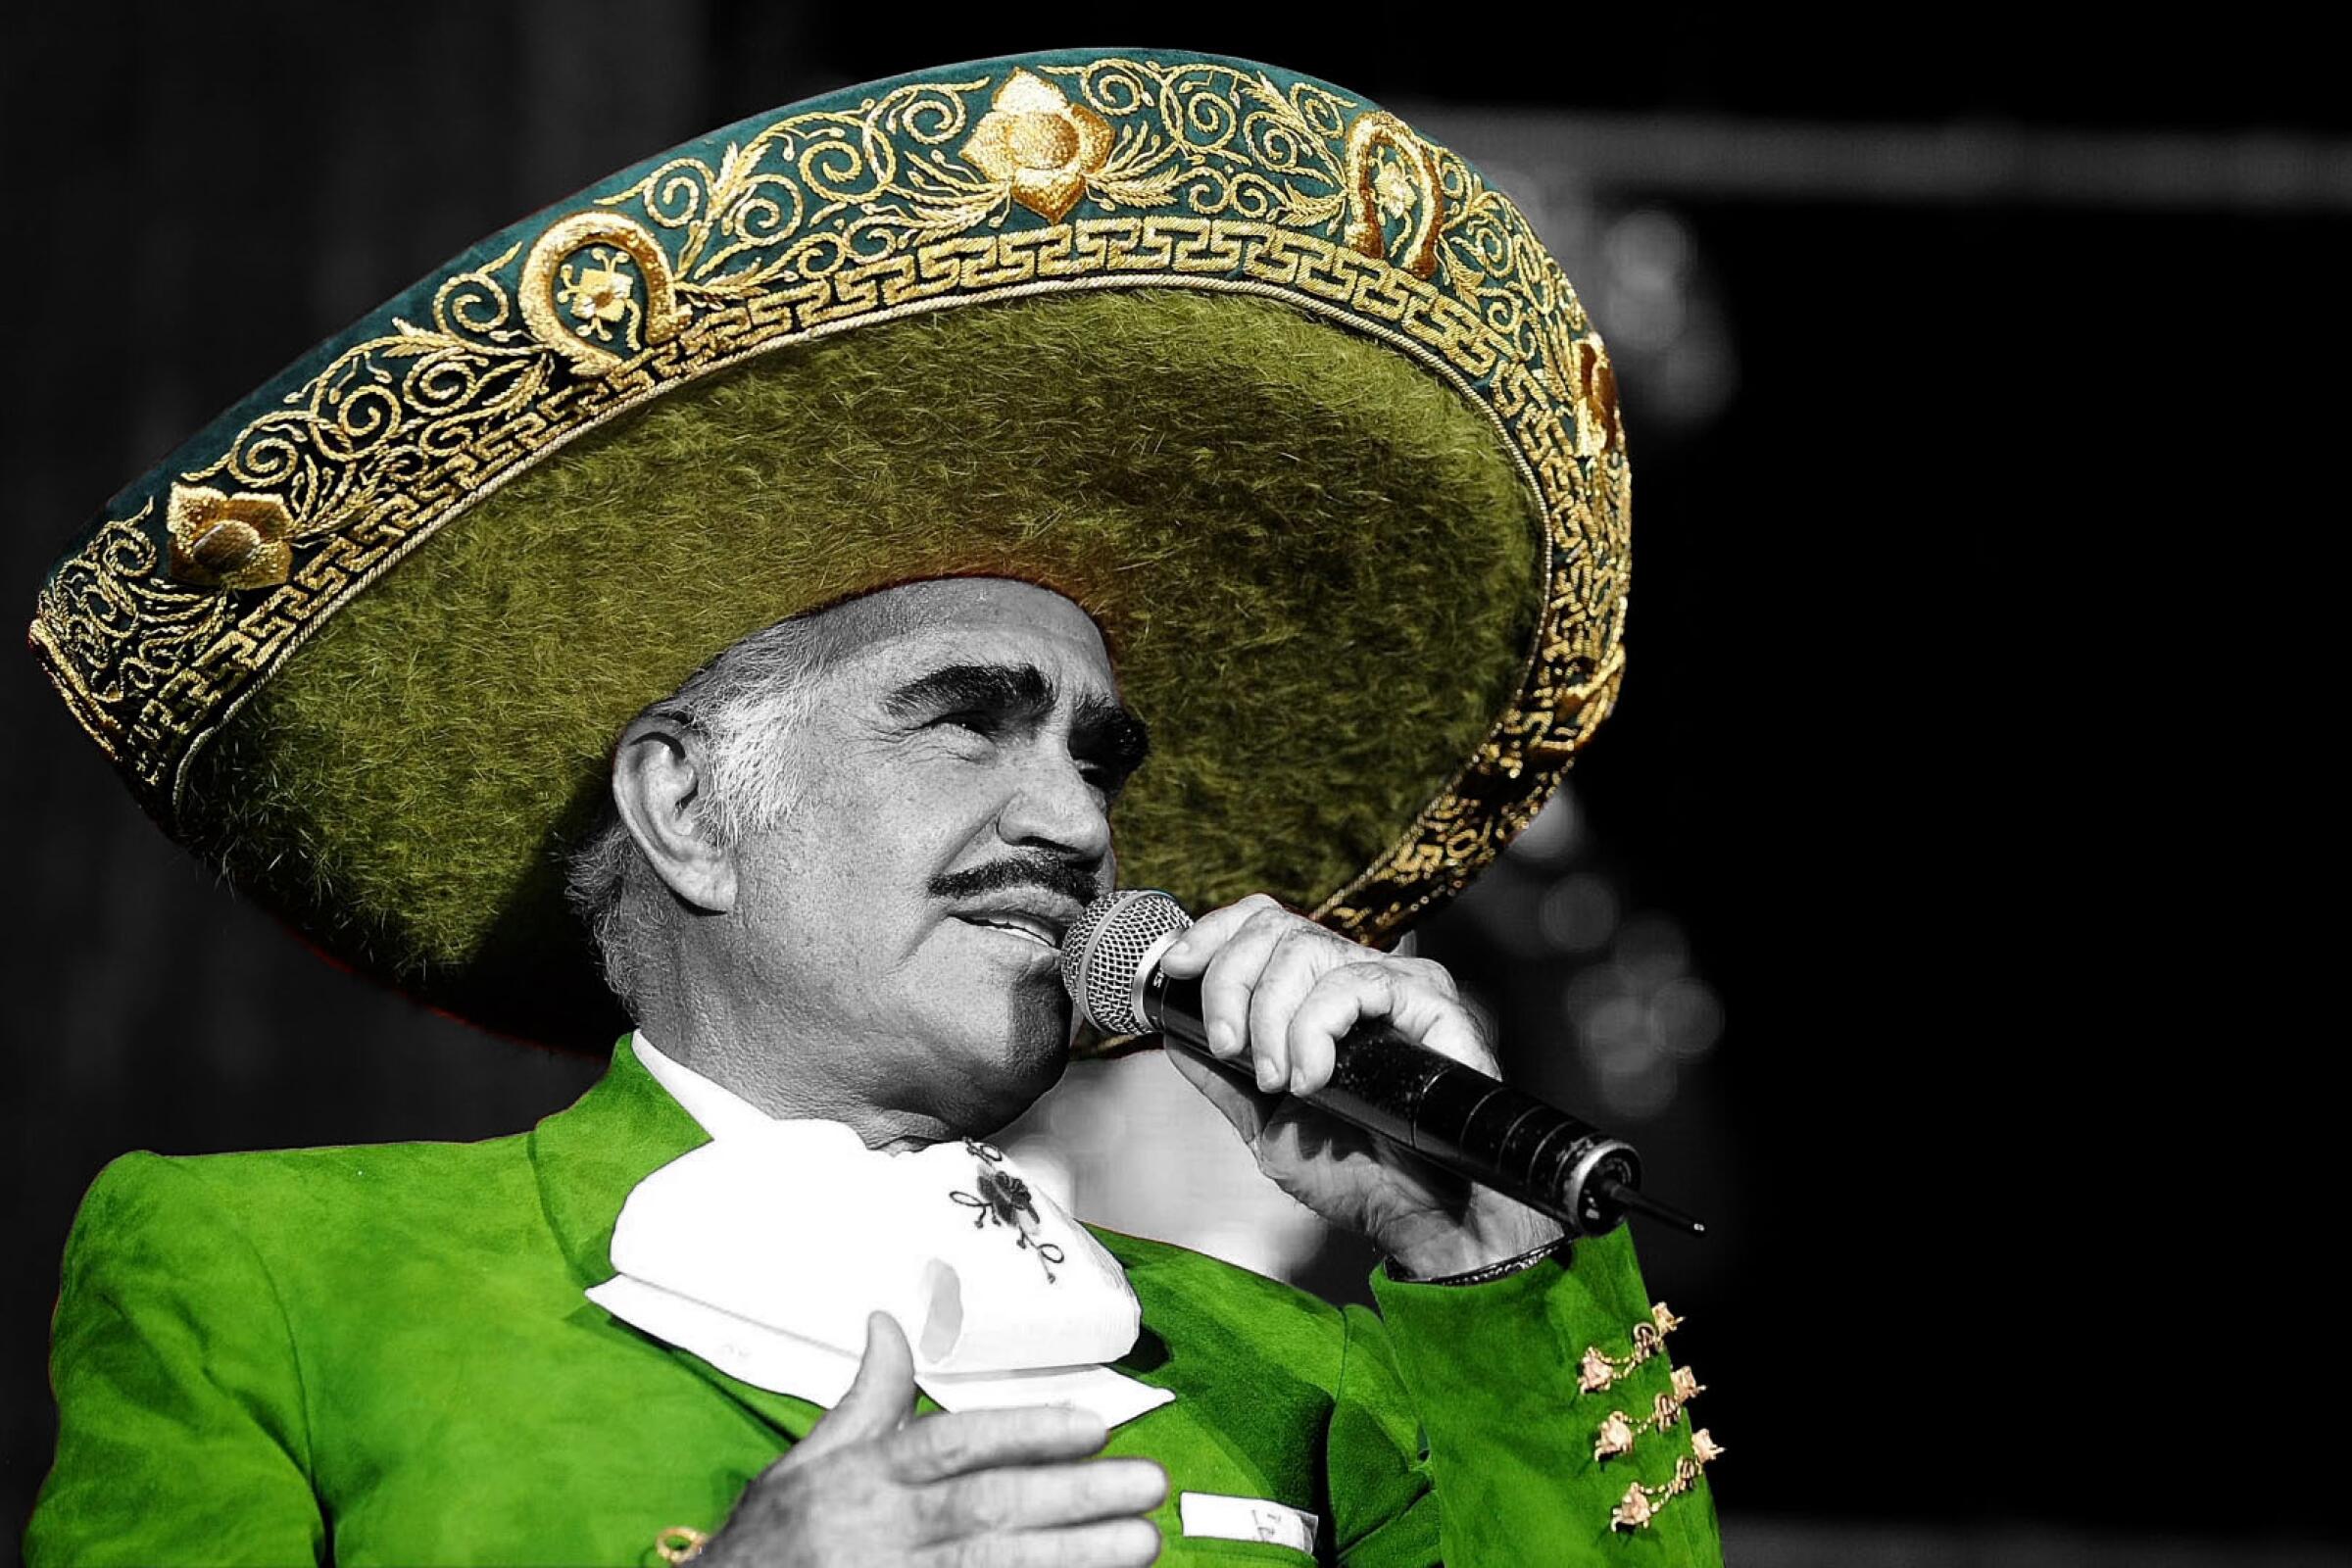 A mustachioed man in an elaborately embroidered sombrero and green jacket holds a microphone 